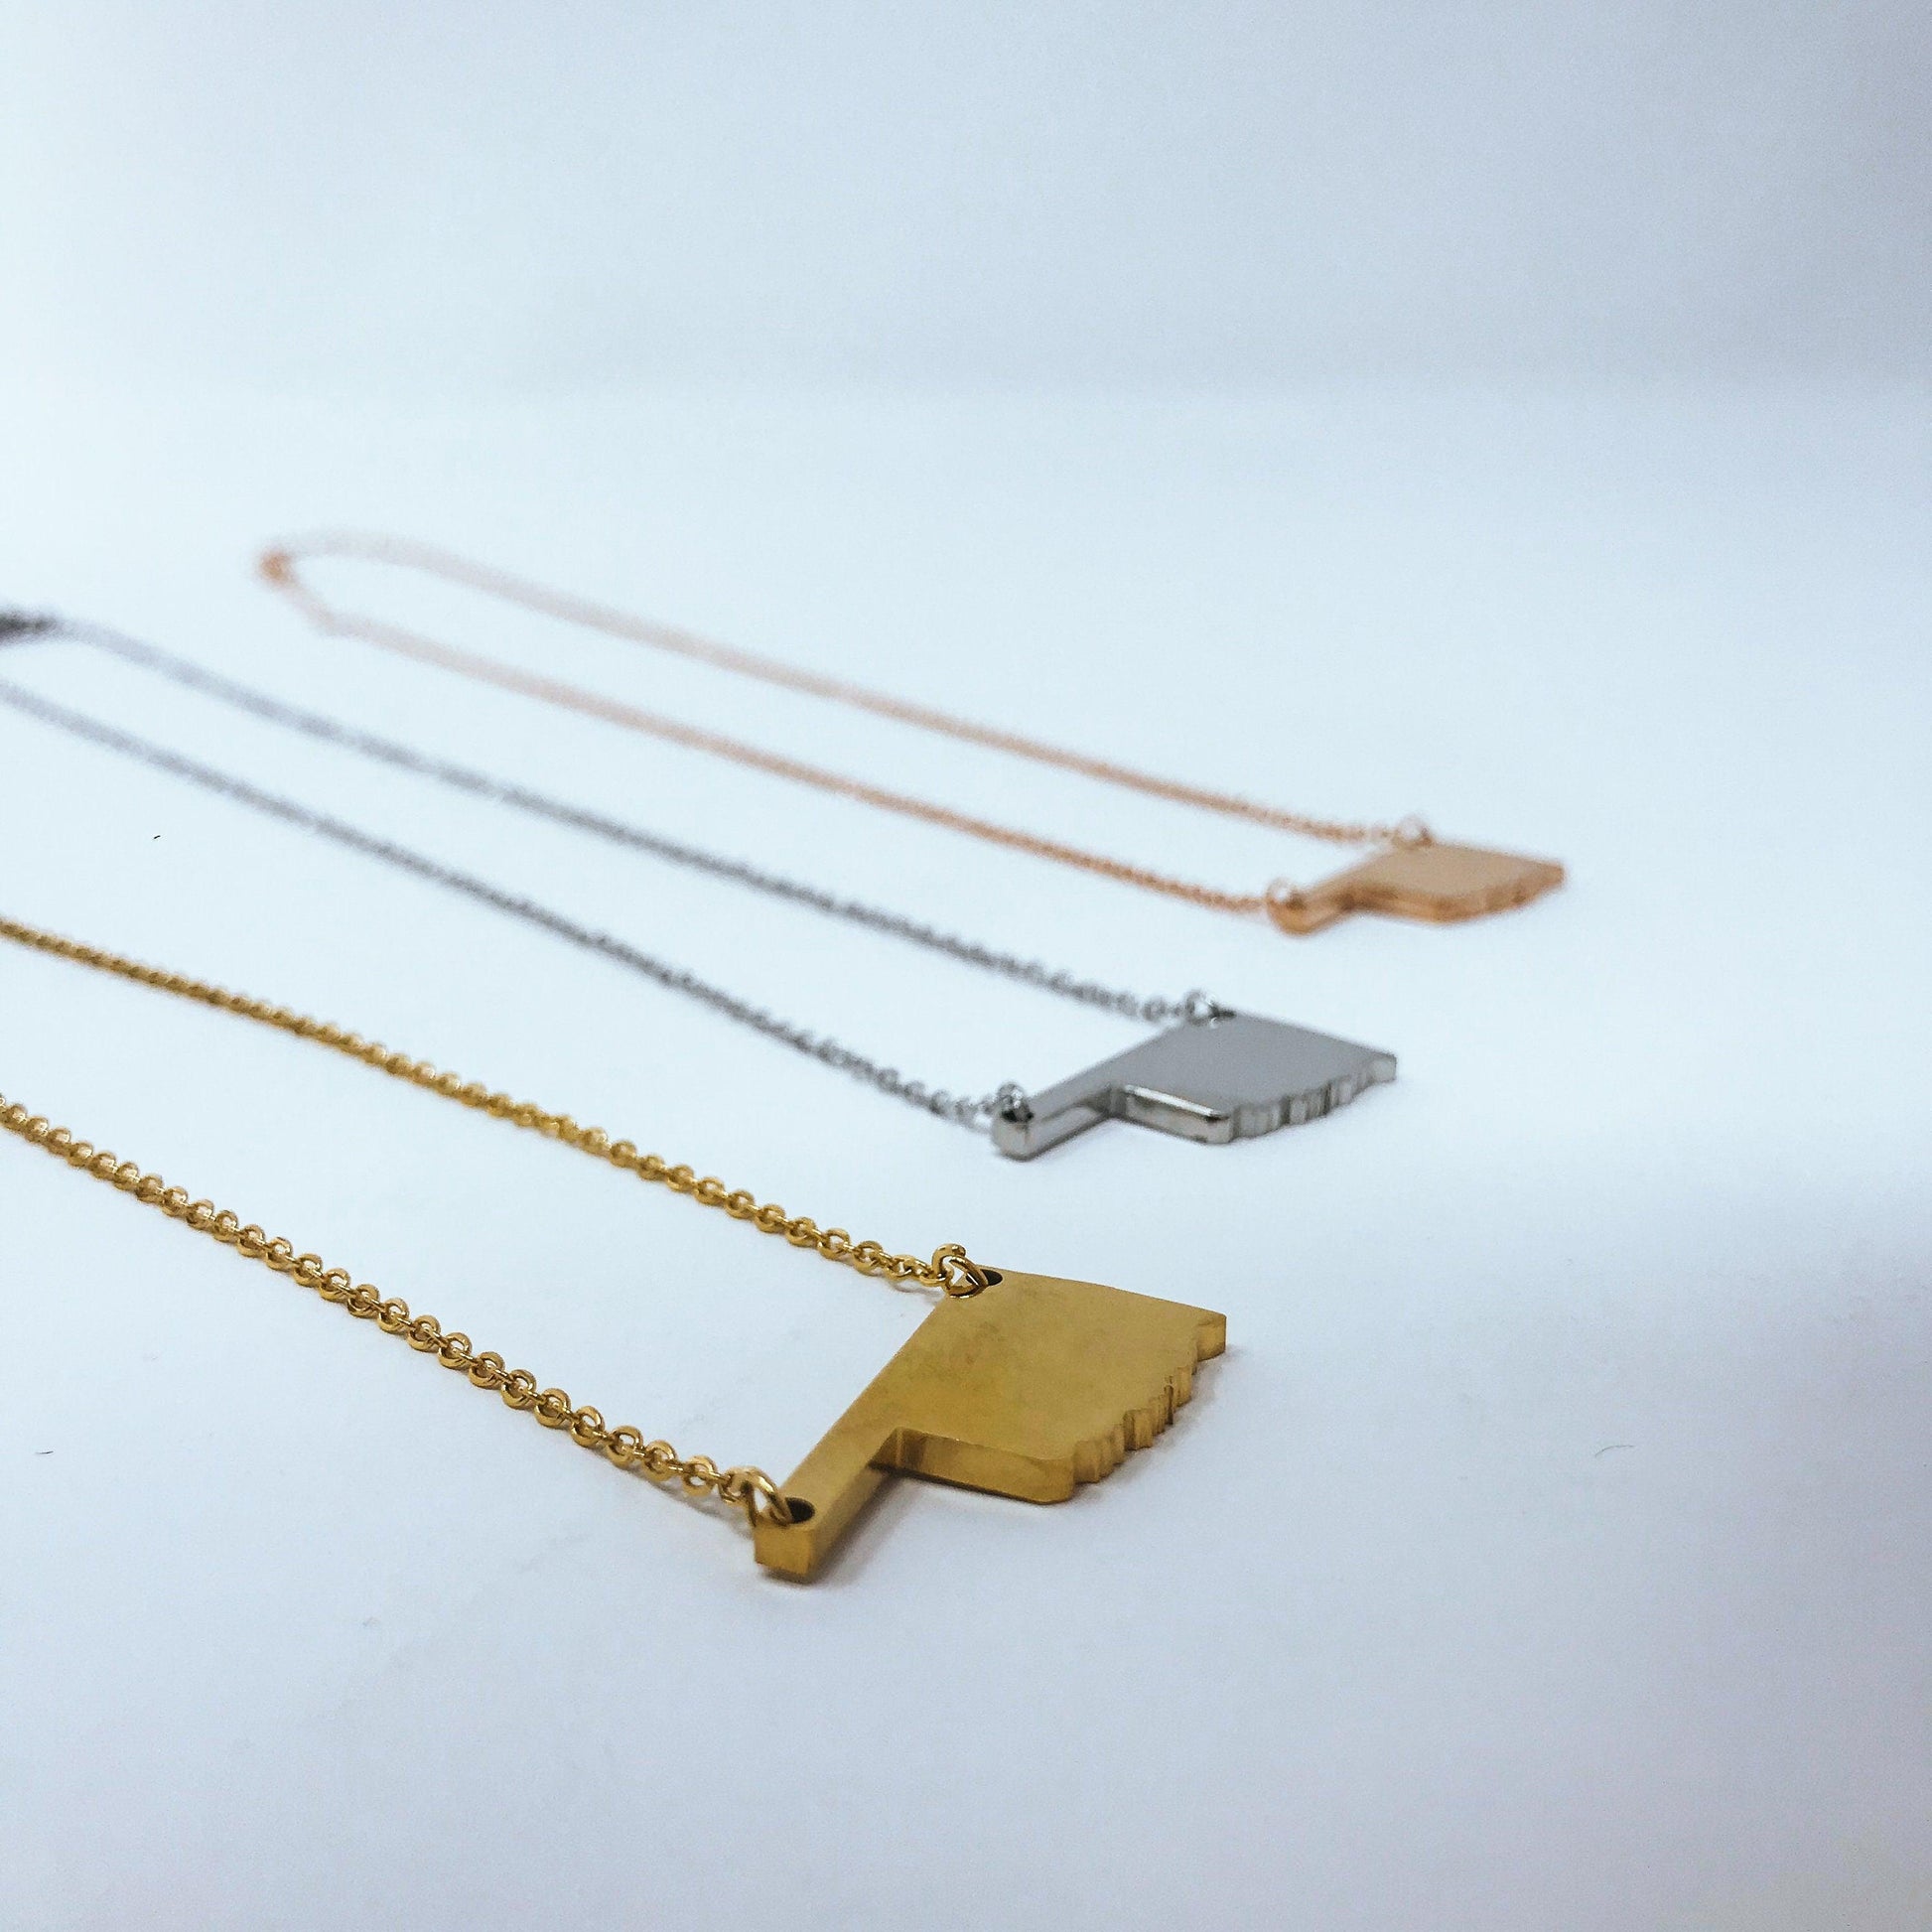 Oklahoma State Silhouette Necklaces in 3 different colors: Gold, Silver & Rose Gold